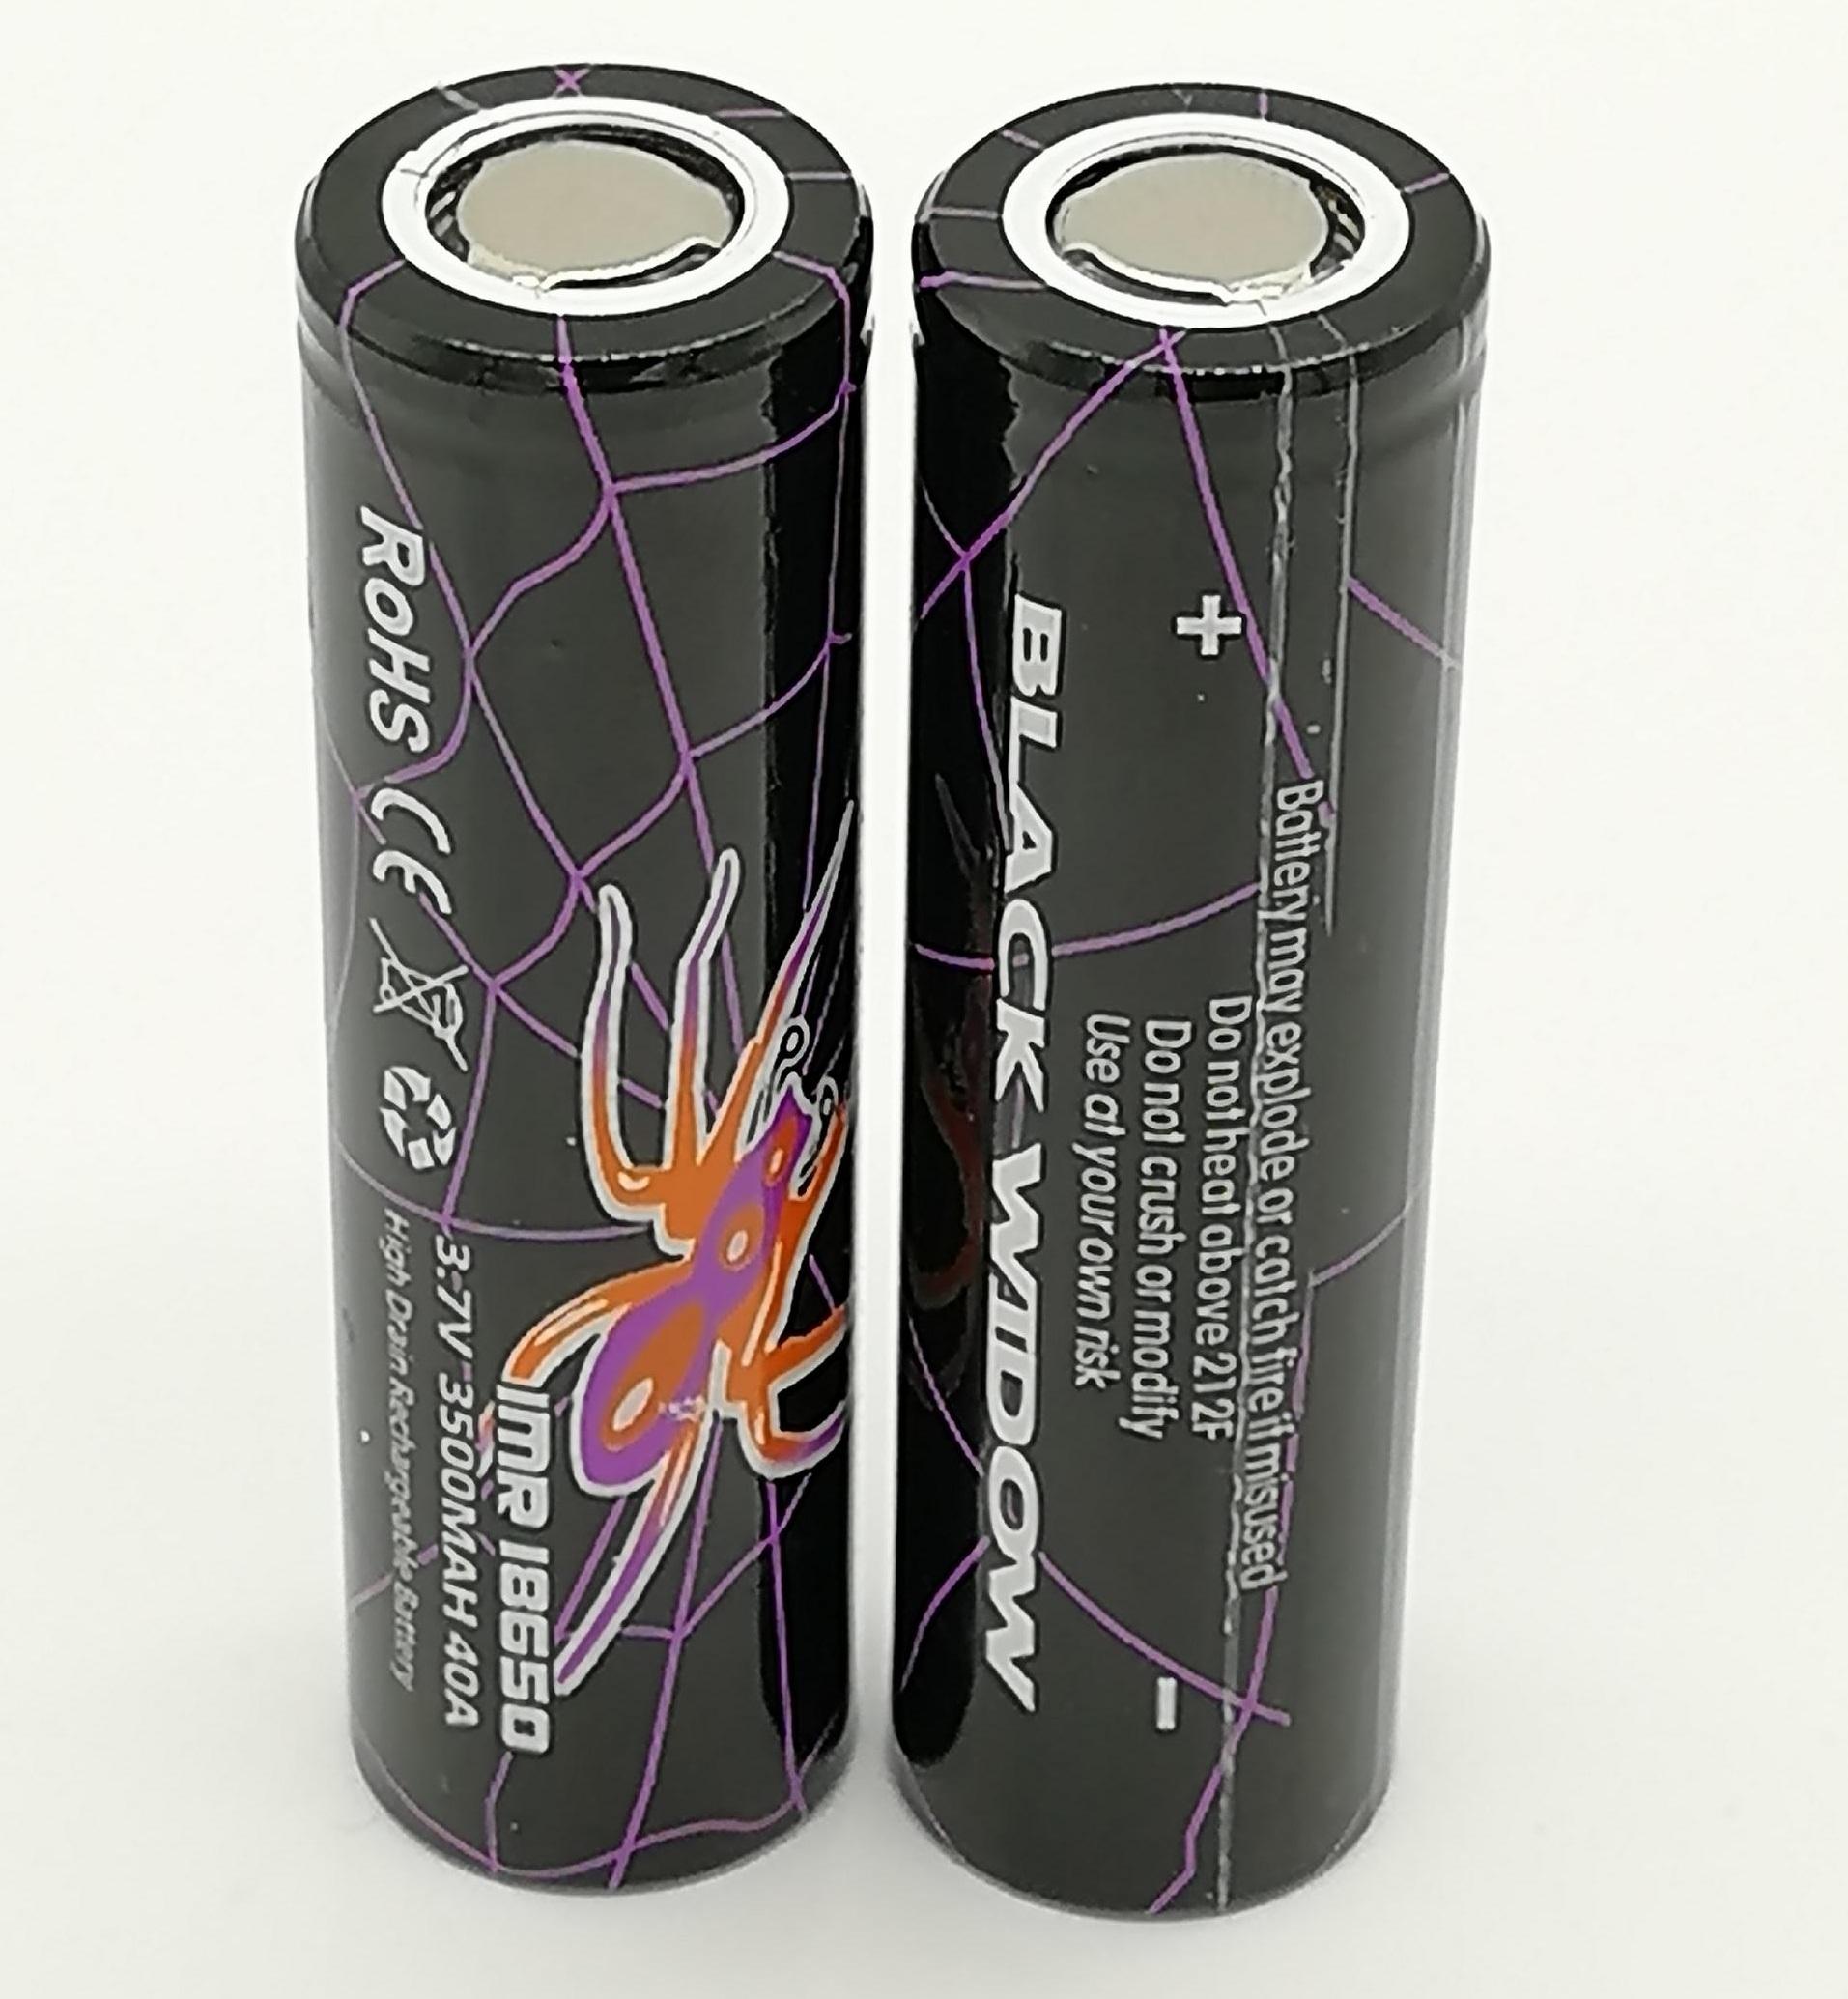 BLACK WIDOW 100% High Quality IMR 18650 Battery 3500mAh 40A 3.7V Rechargable Lithium Electronic cigarette Batteries